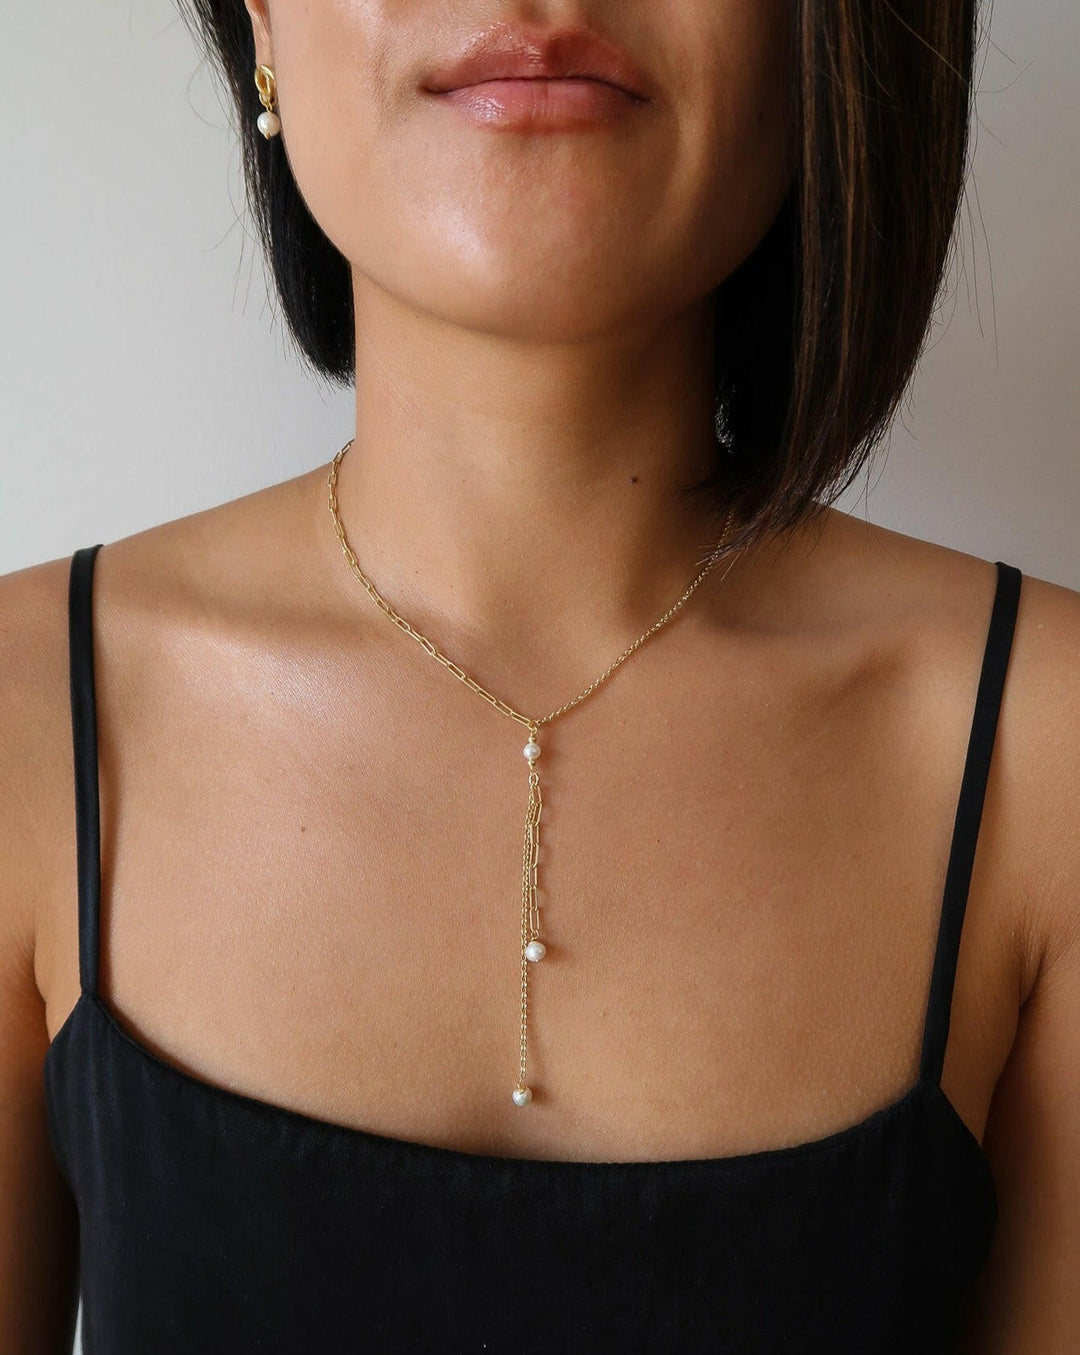 gold and pearl lariat necklace with pearls dripping down, zoomed out